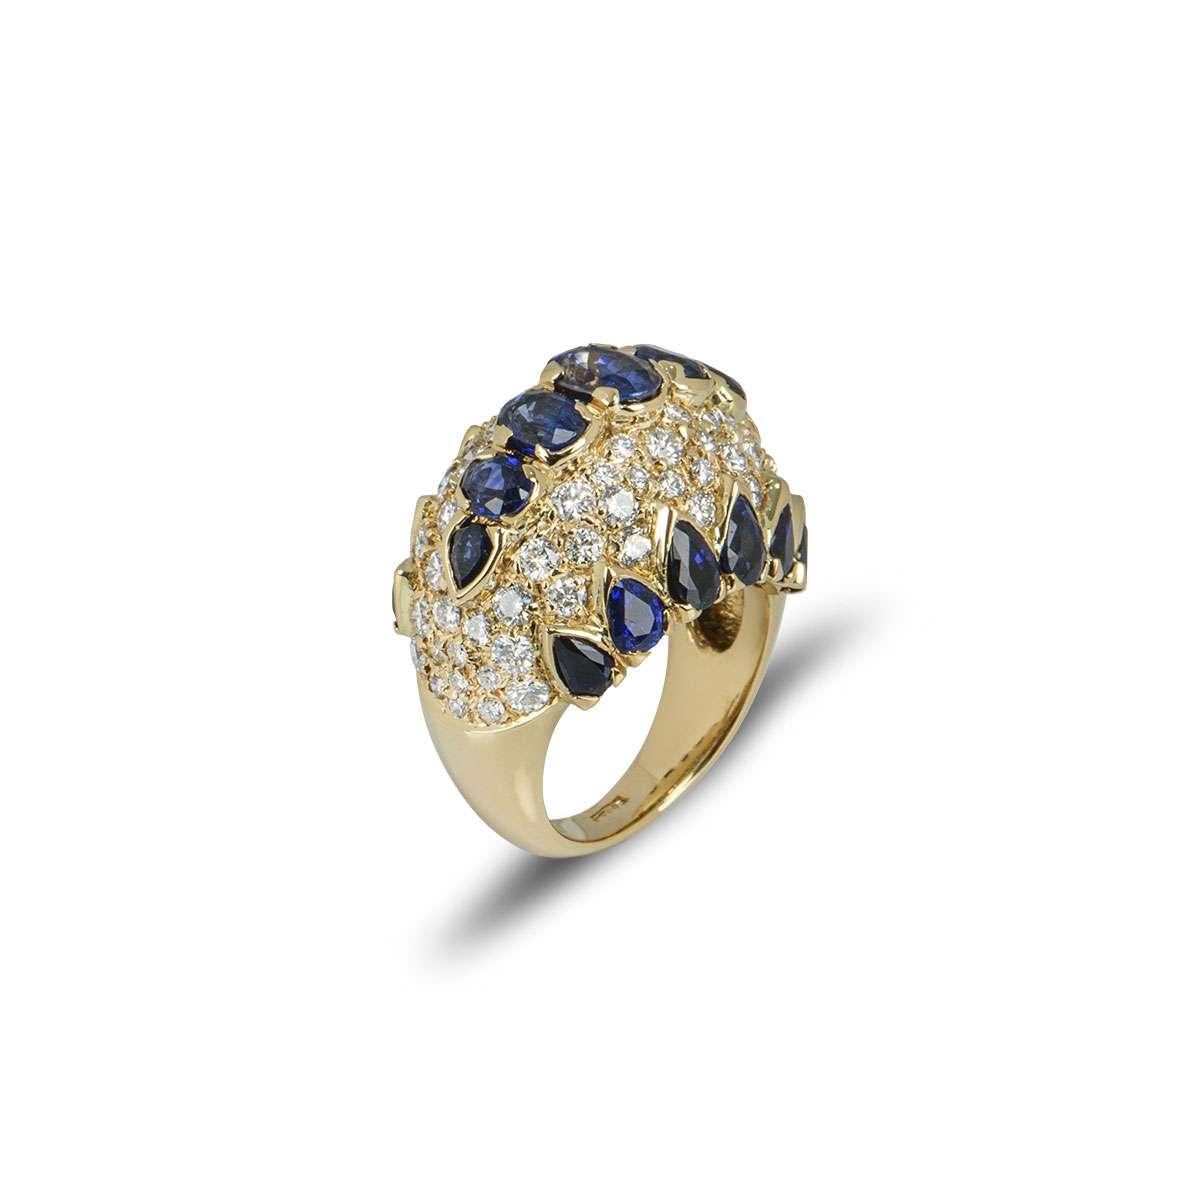 An 18k yellow gold sapphire and diamond dress ring. The bombe style ring is set with 3 rows of oval and pear cut blue sapphires, with round brilliant cut pave set diamonds in-between. The sapphires have a total weight of approximately 5.00ct and the